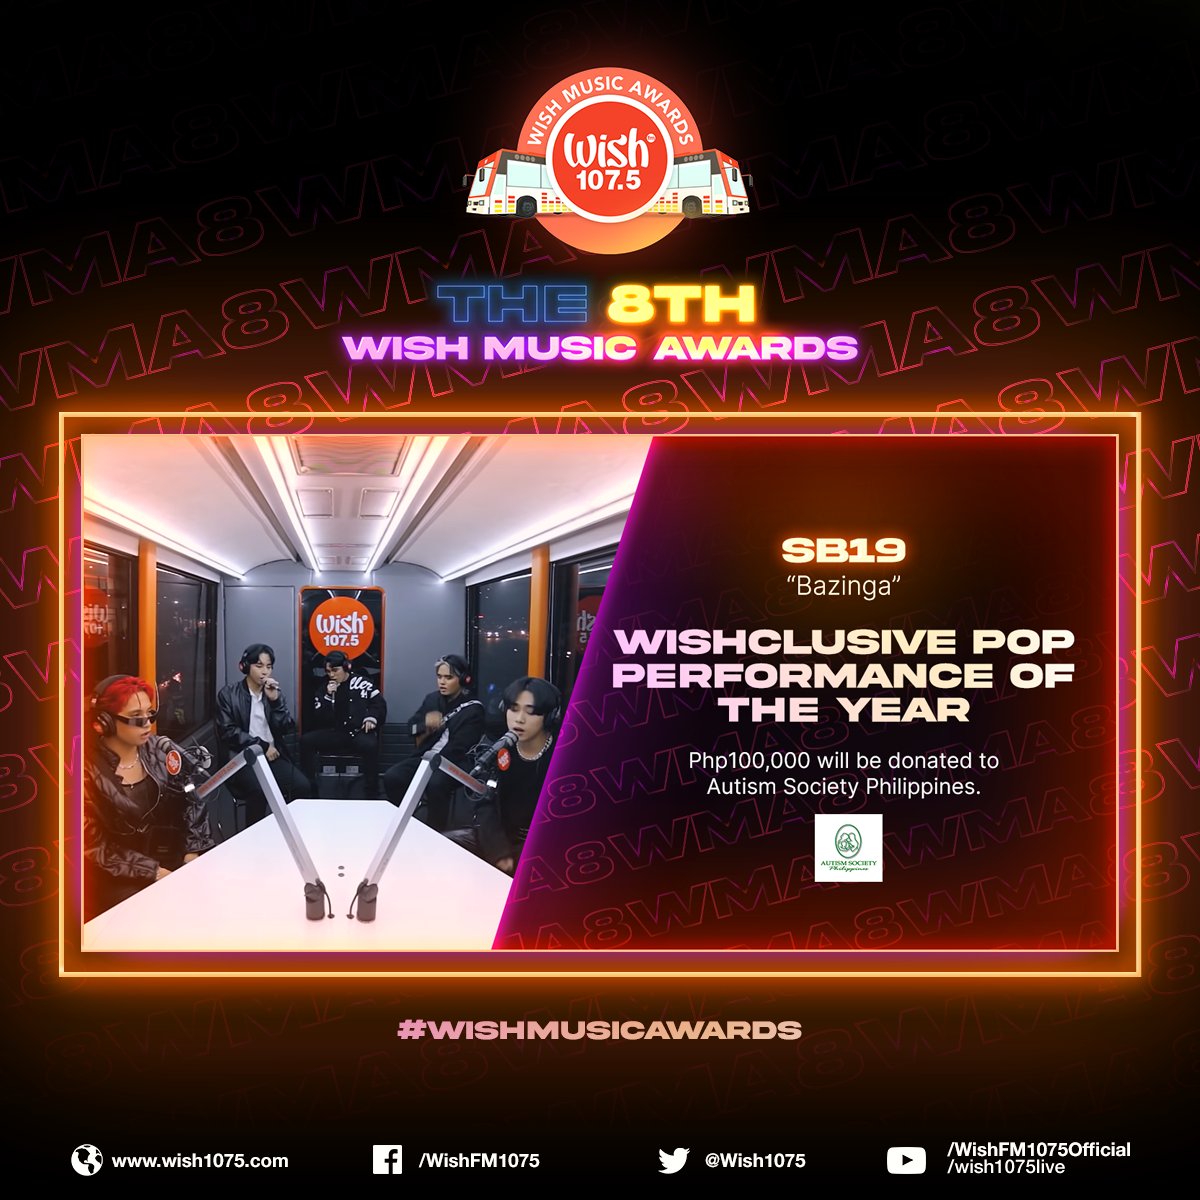 You just turn the world upside down! @SB19Official brags Wishclusive Pop Performance of the Year  for “Bazinga”!

#SB19
#WishMusicAwards